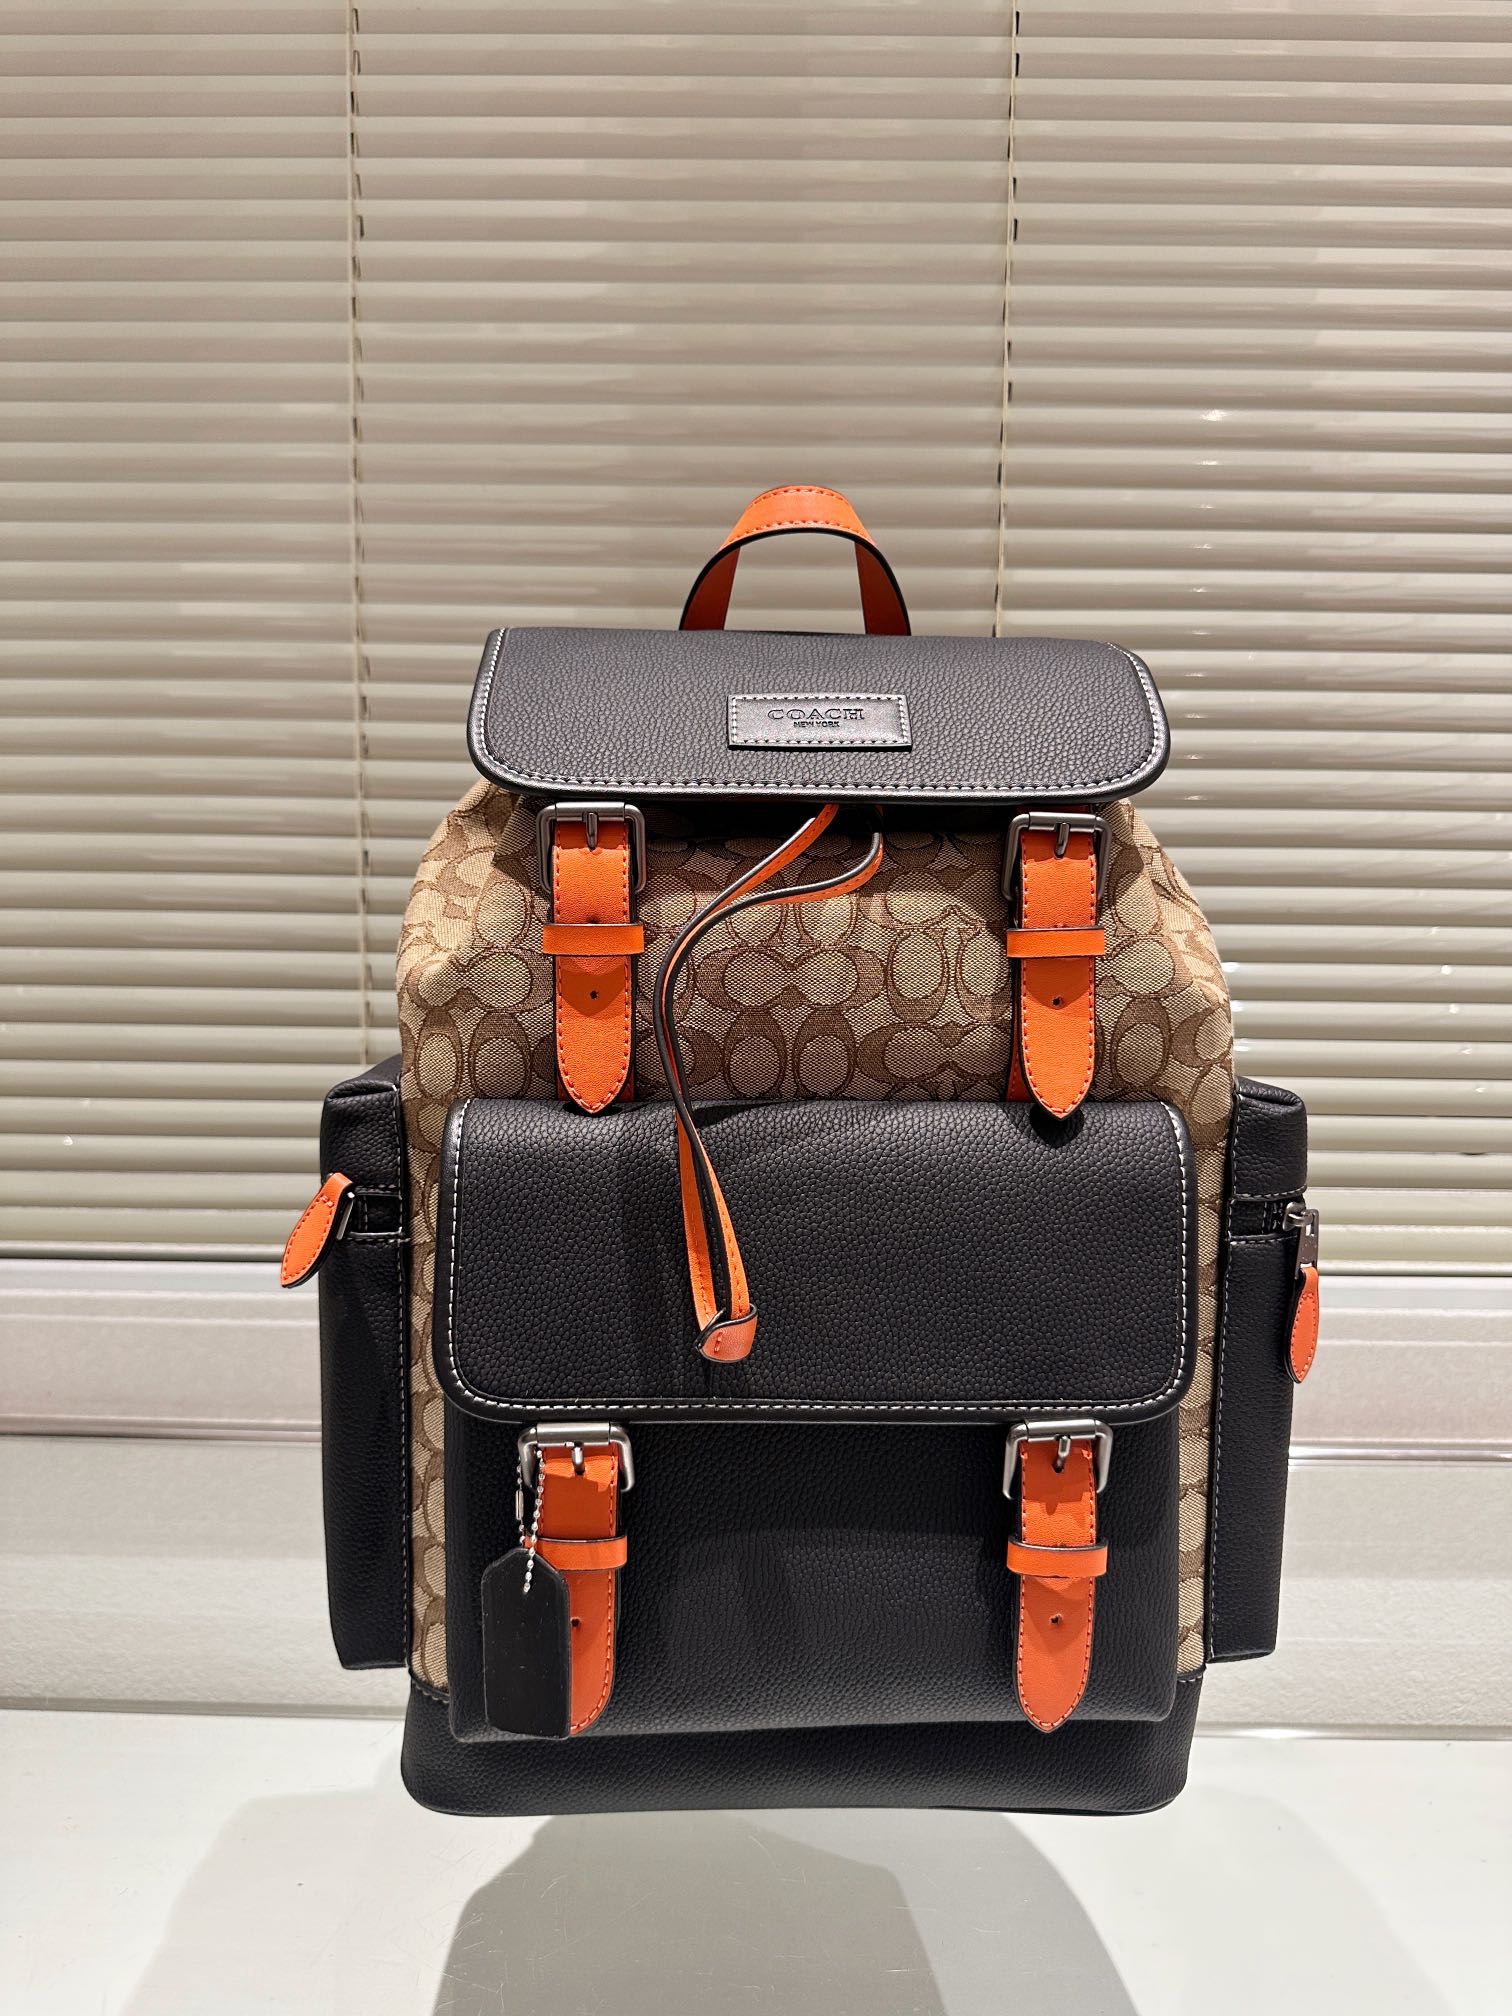 Coach Bags Backpack Buy the Best High Quality Replica
 Printing Cowhide